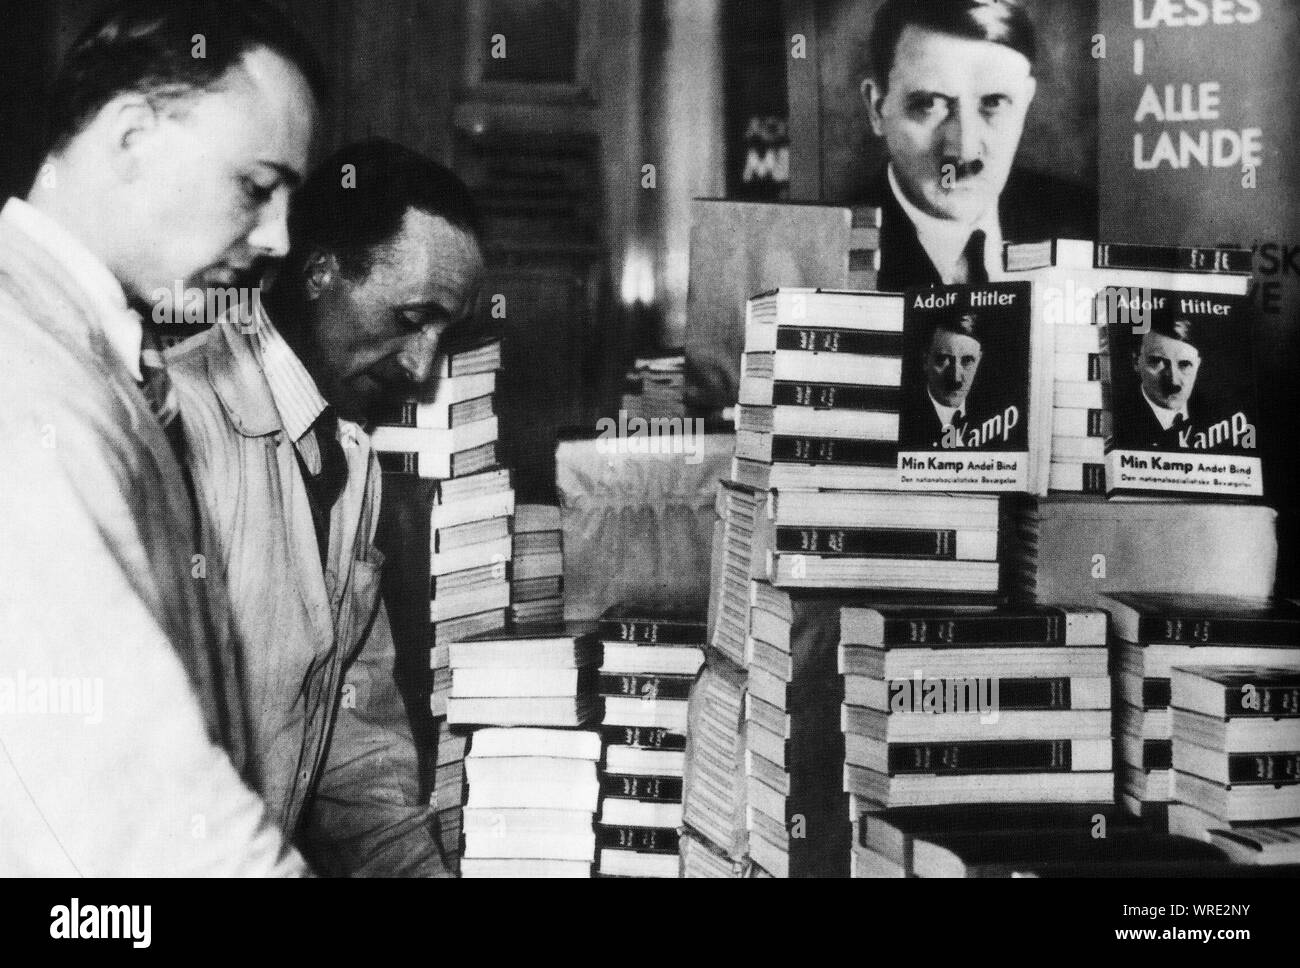 Mein Kampf being sold in Berlin in late 30s Stock Photo